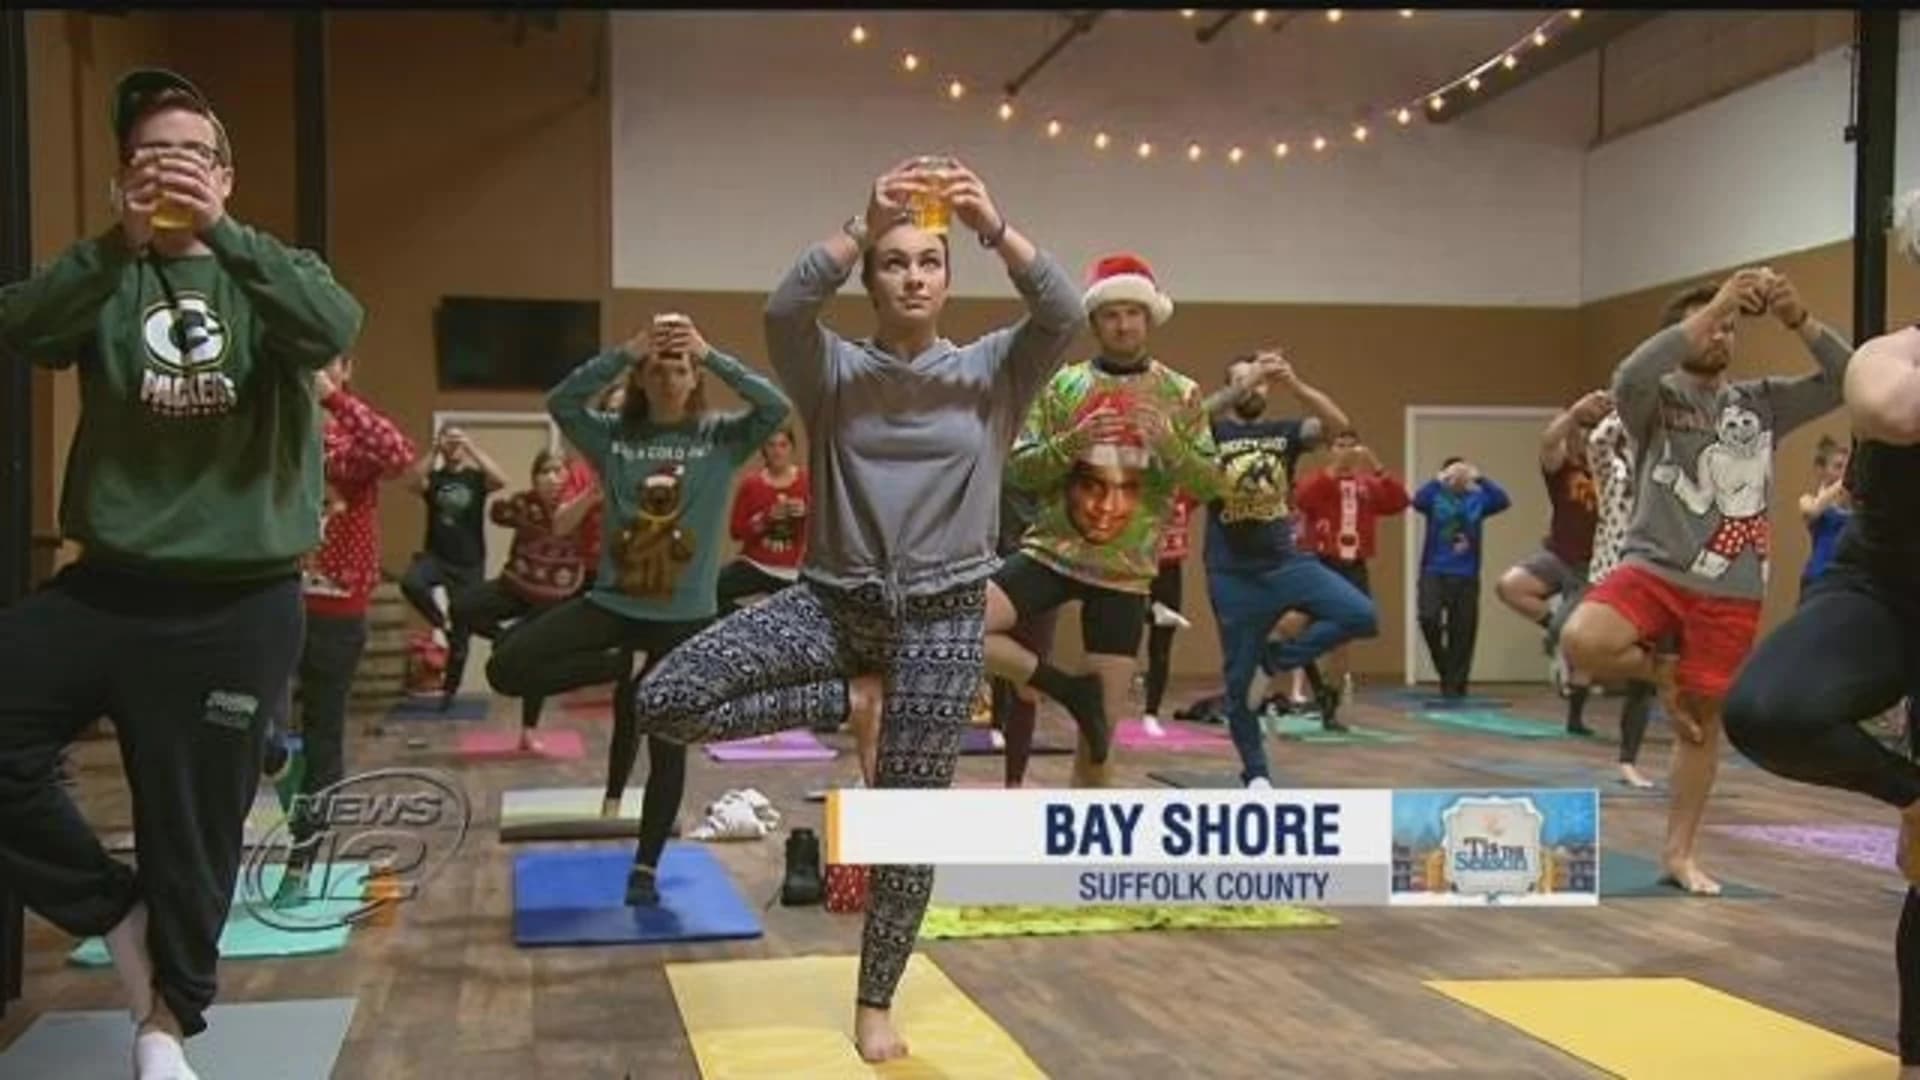 Holiday event combines local brews, ugly sweaters, yoga